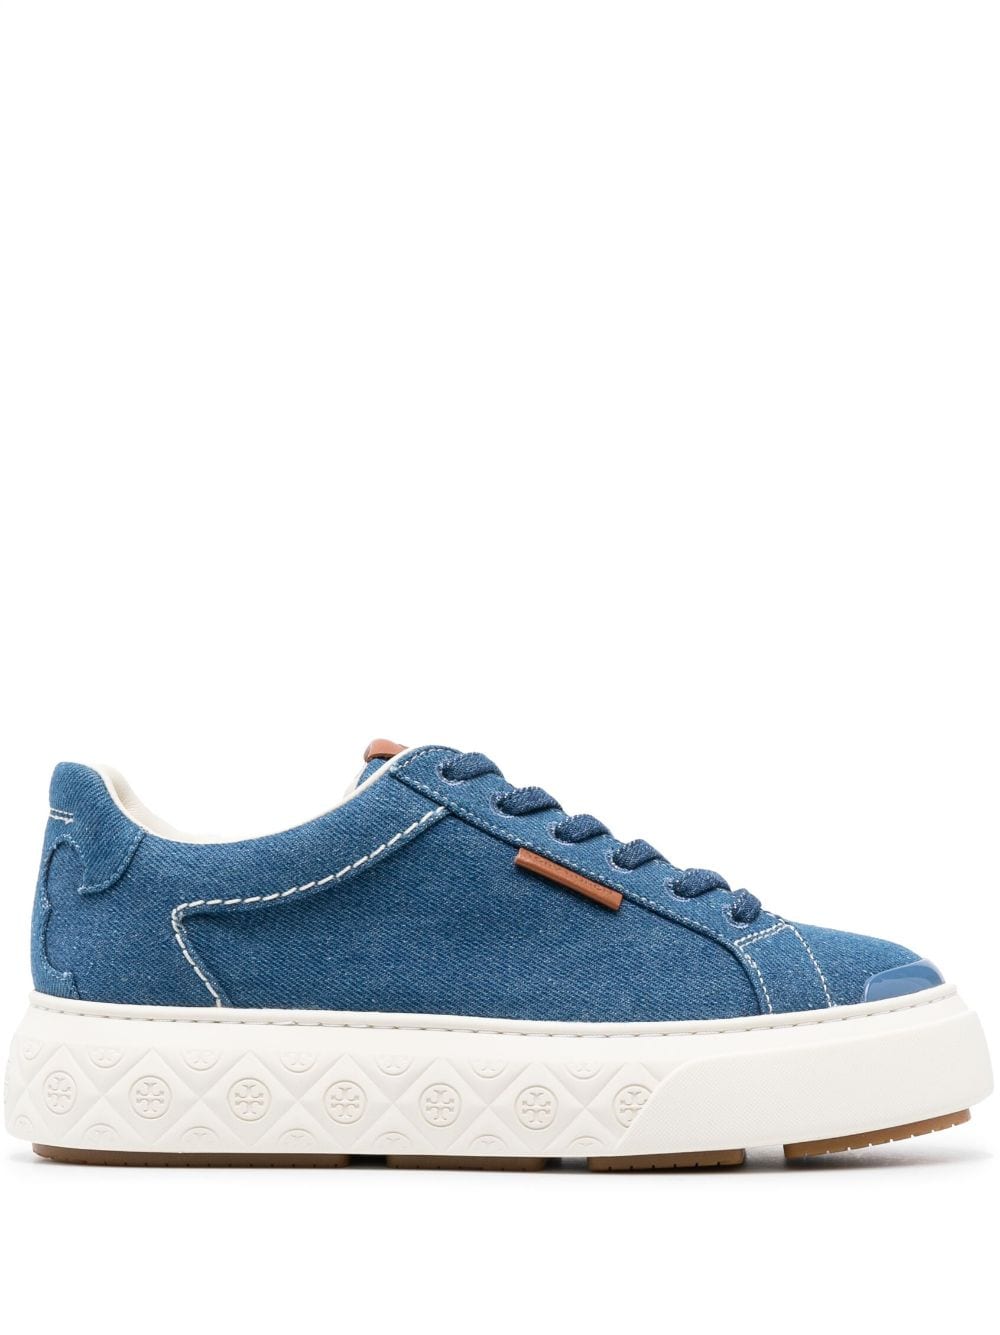 TORY BURCH LOGO-PATCH LACE-UP DENIM SNEAKERS